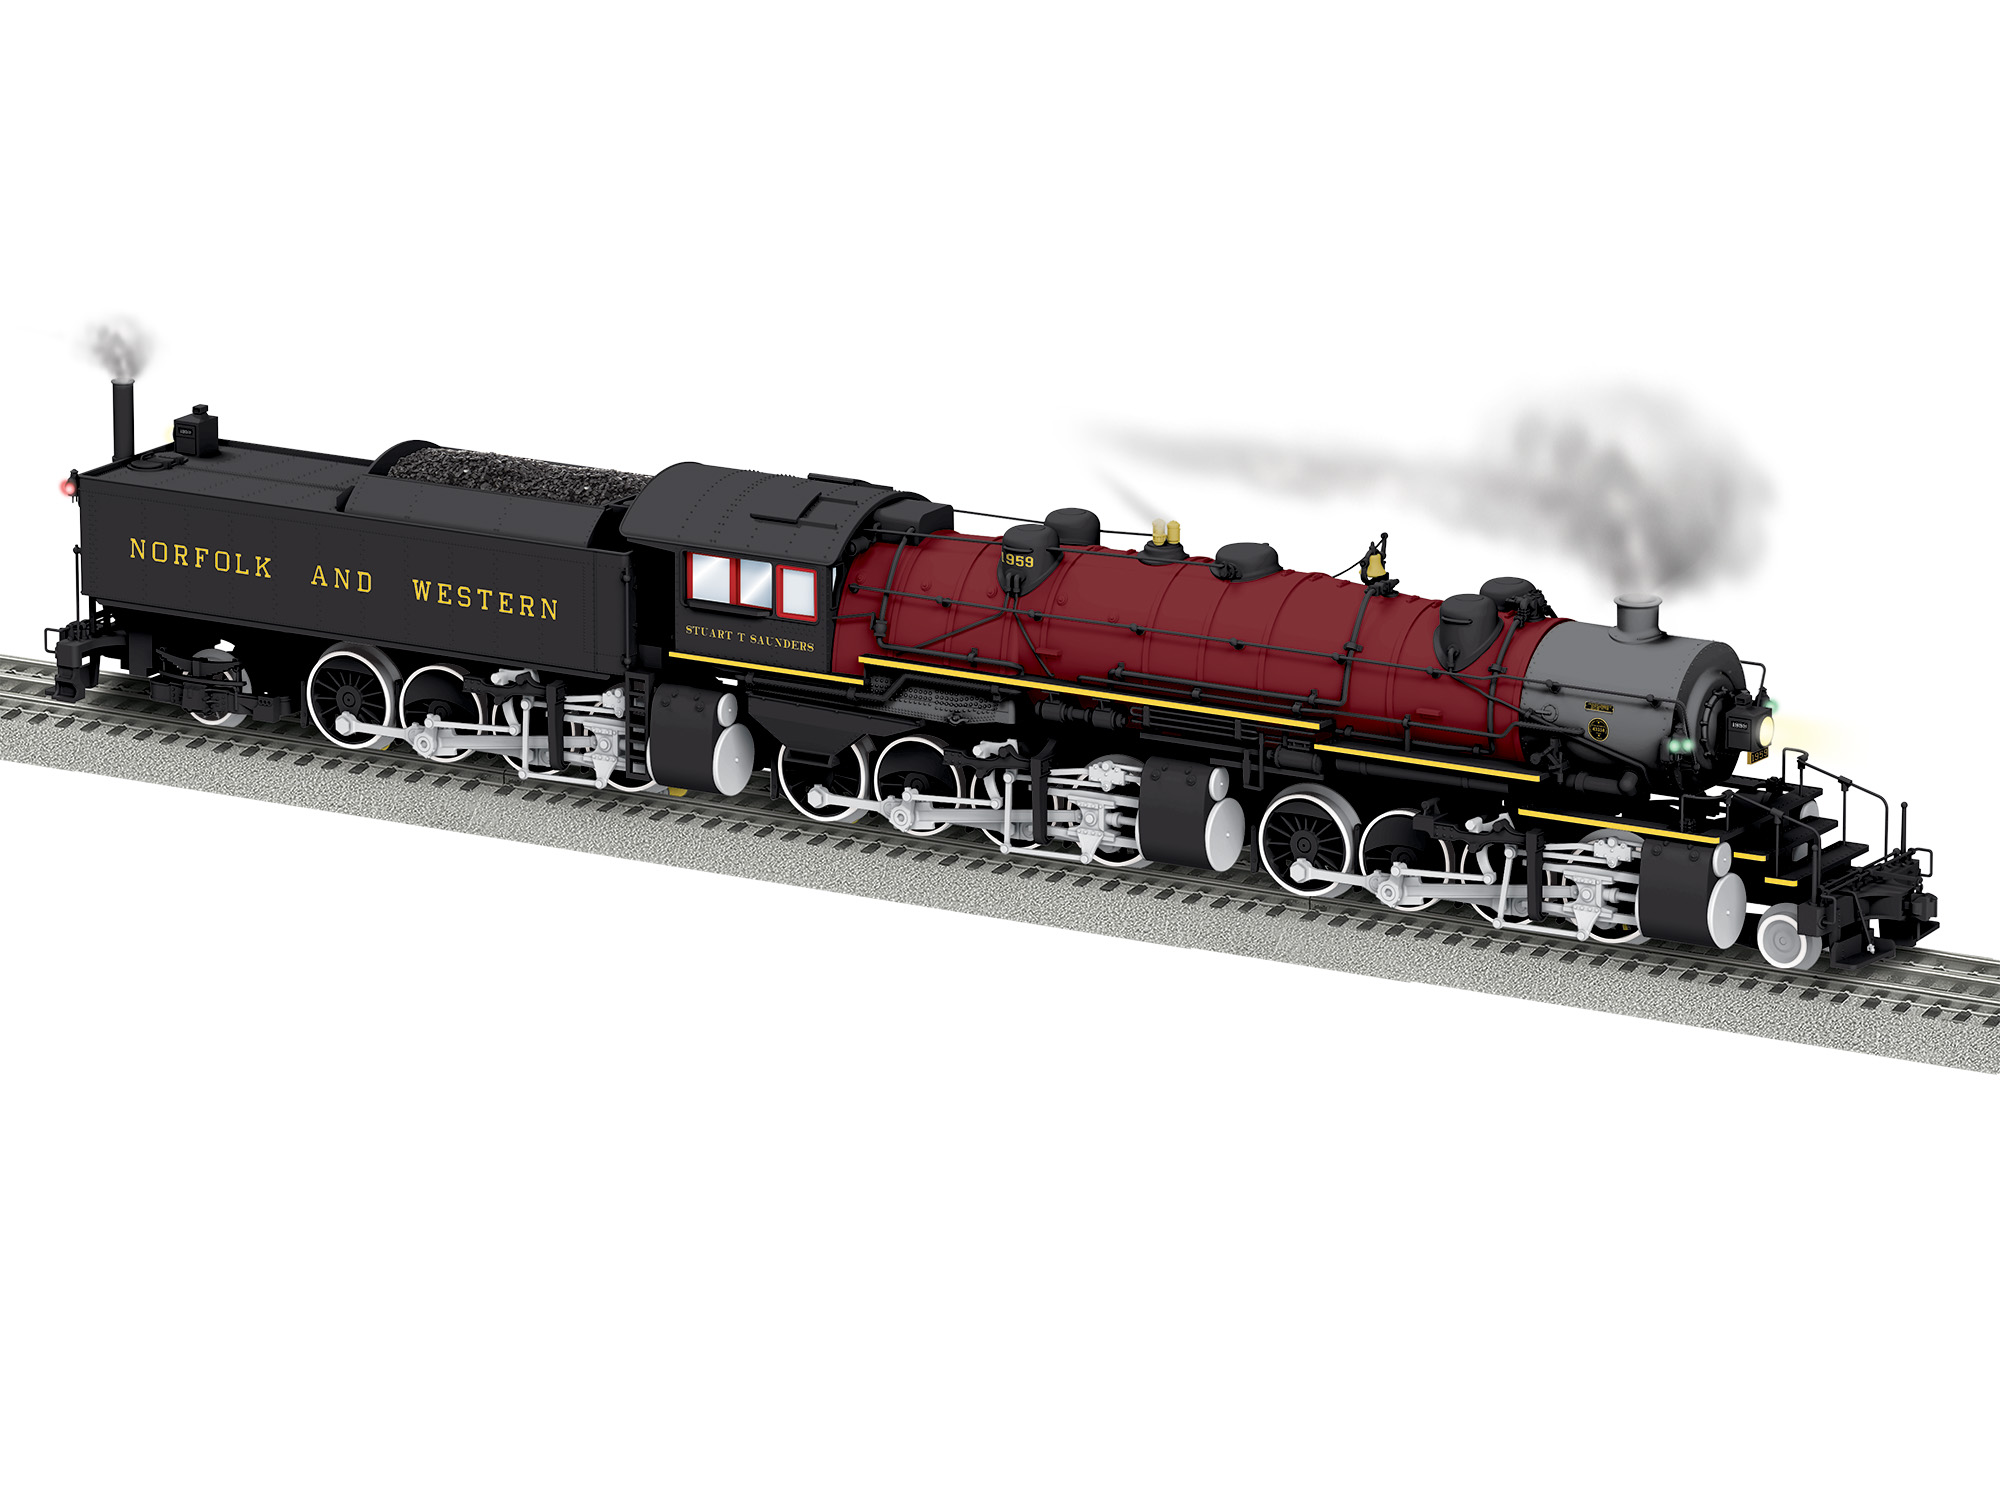 Model railroad snow products - Trains